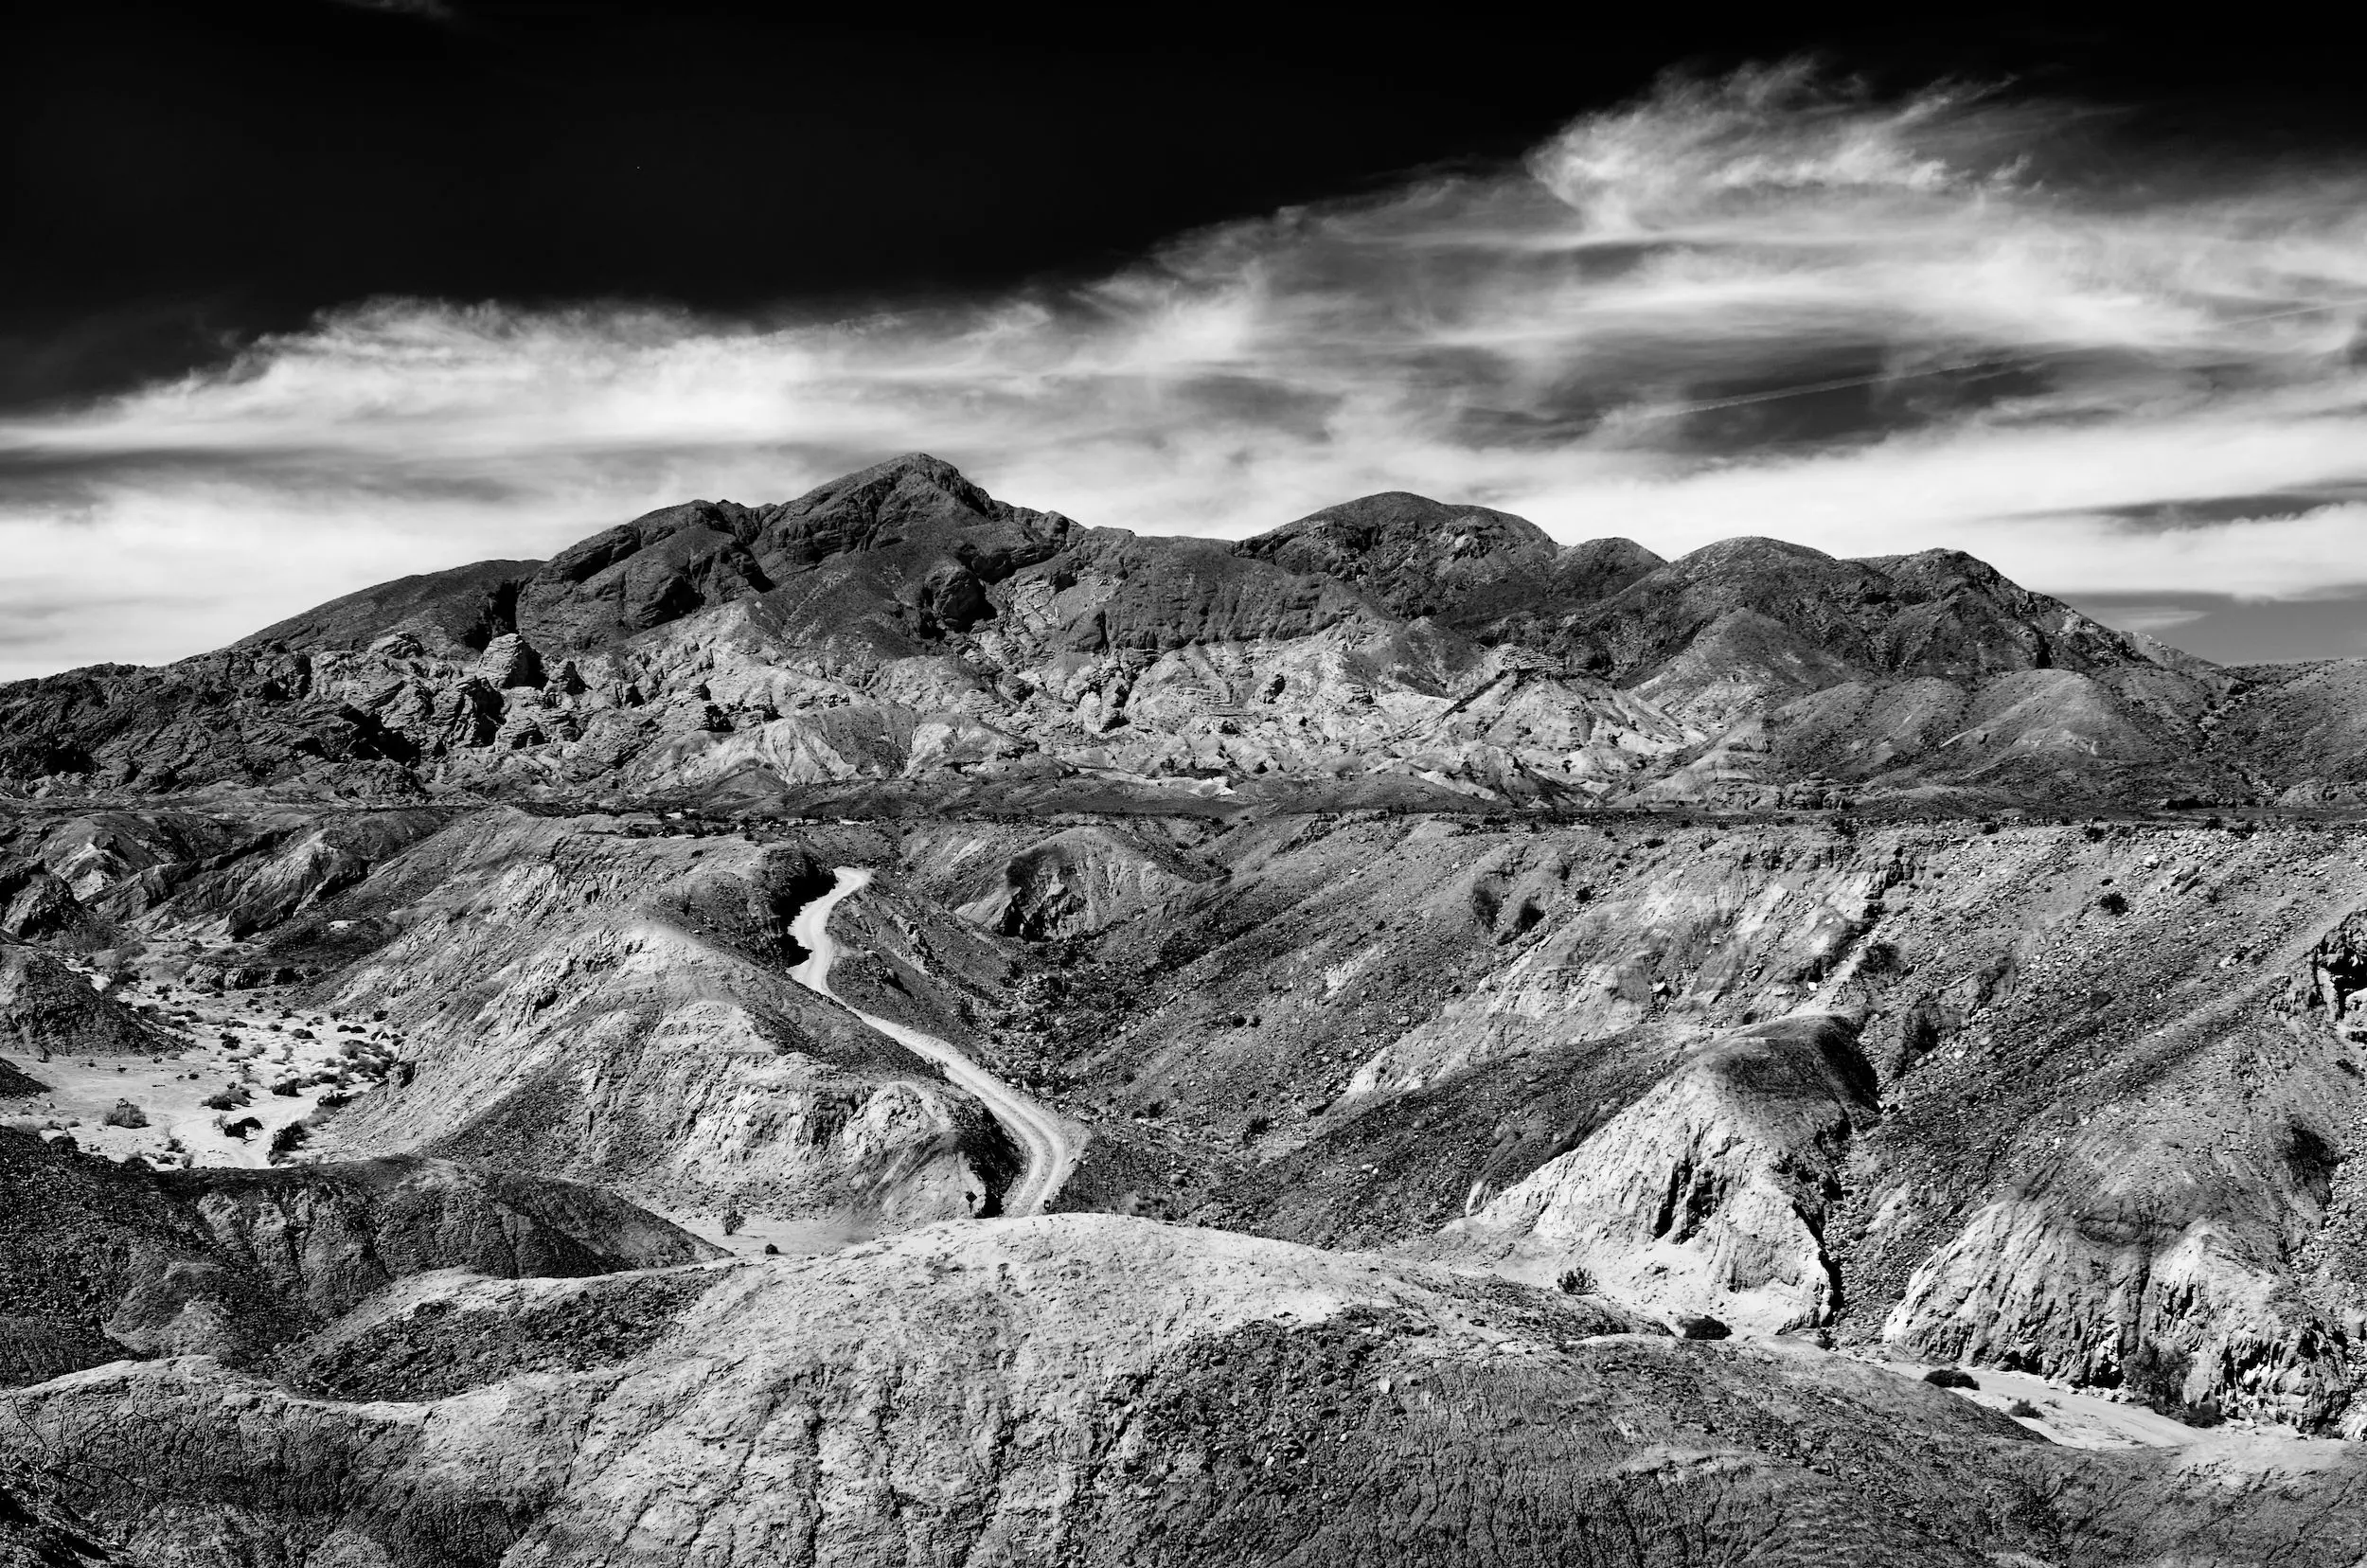 Black and white shot of a road cutting between rocky valleys, with mountains in the background and dramatic clouds in the black sky.